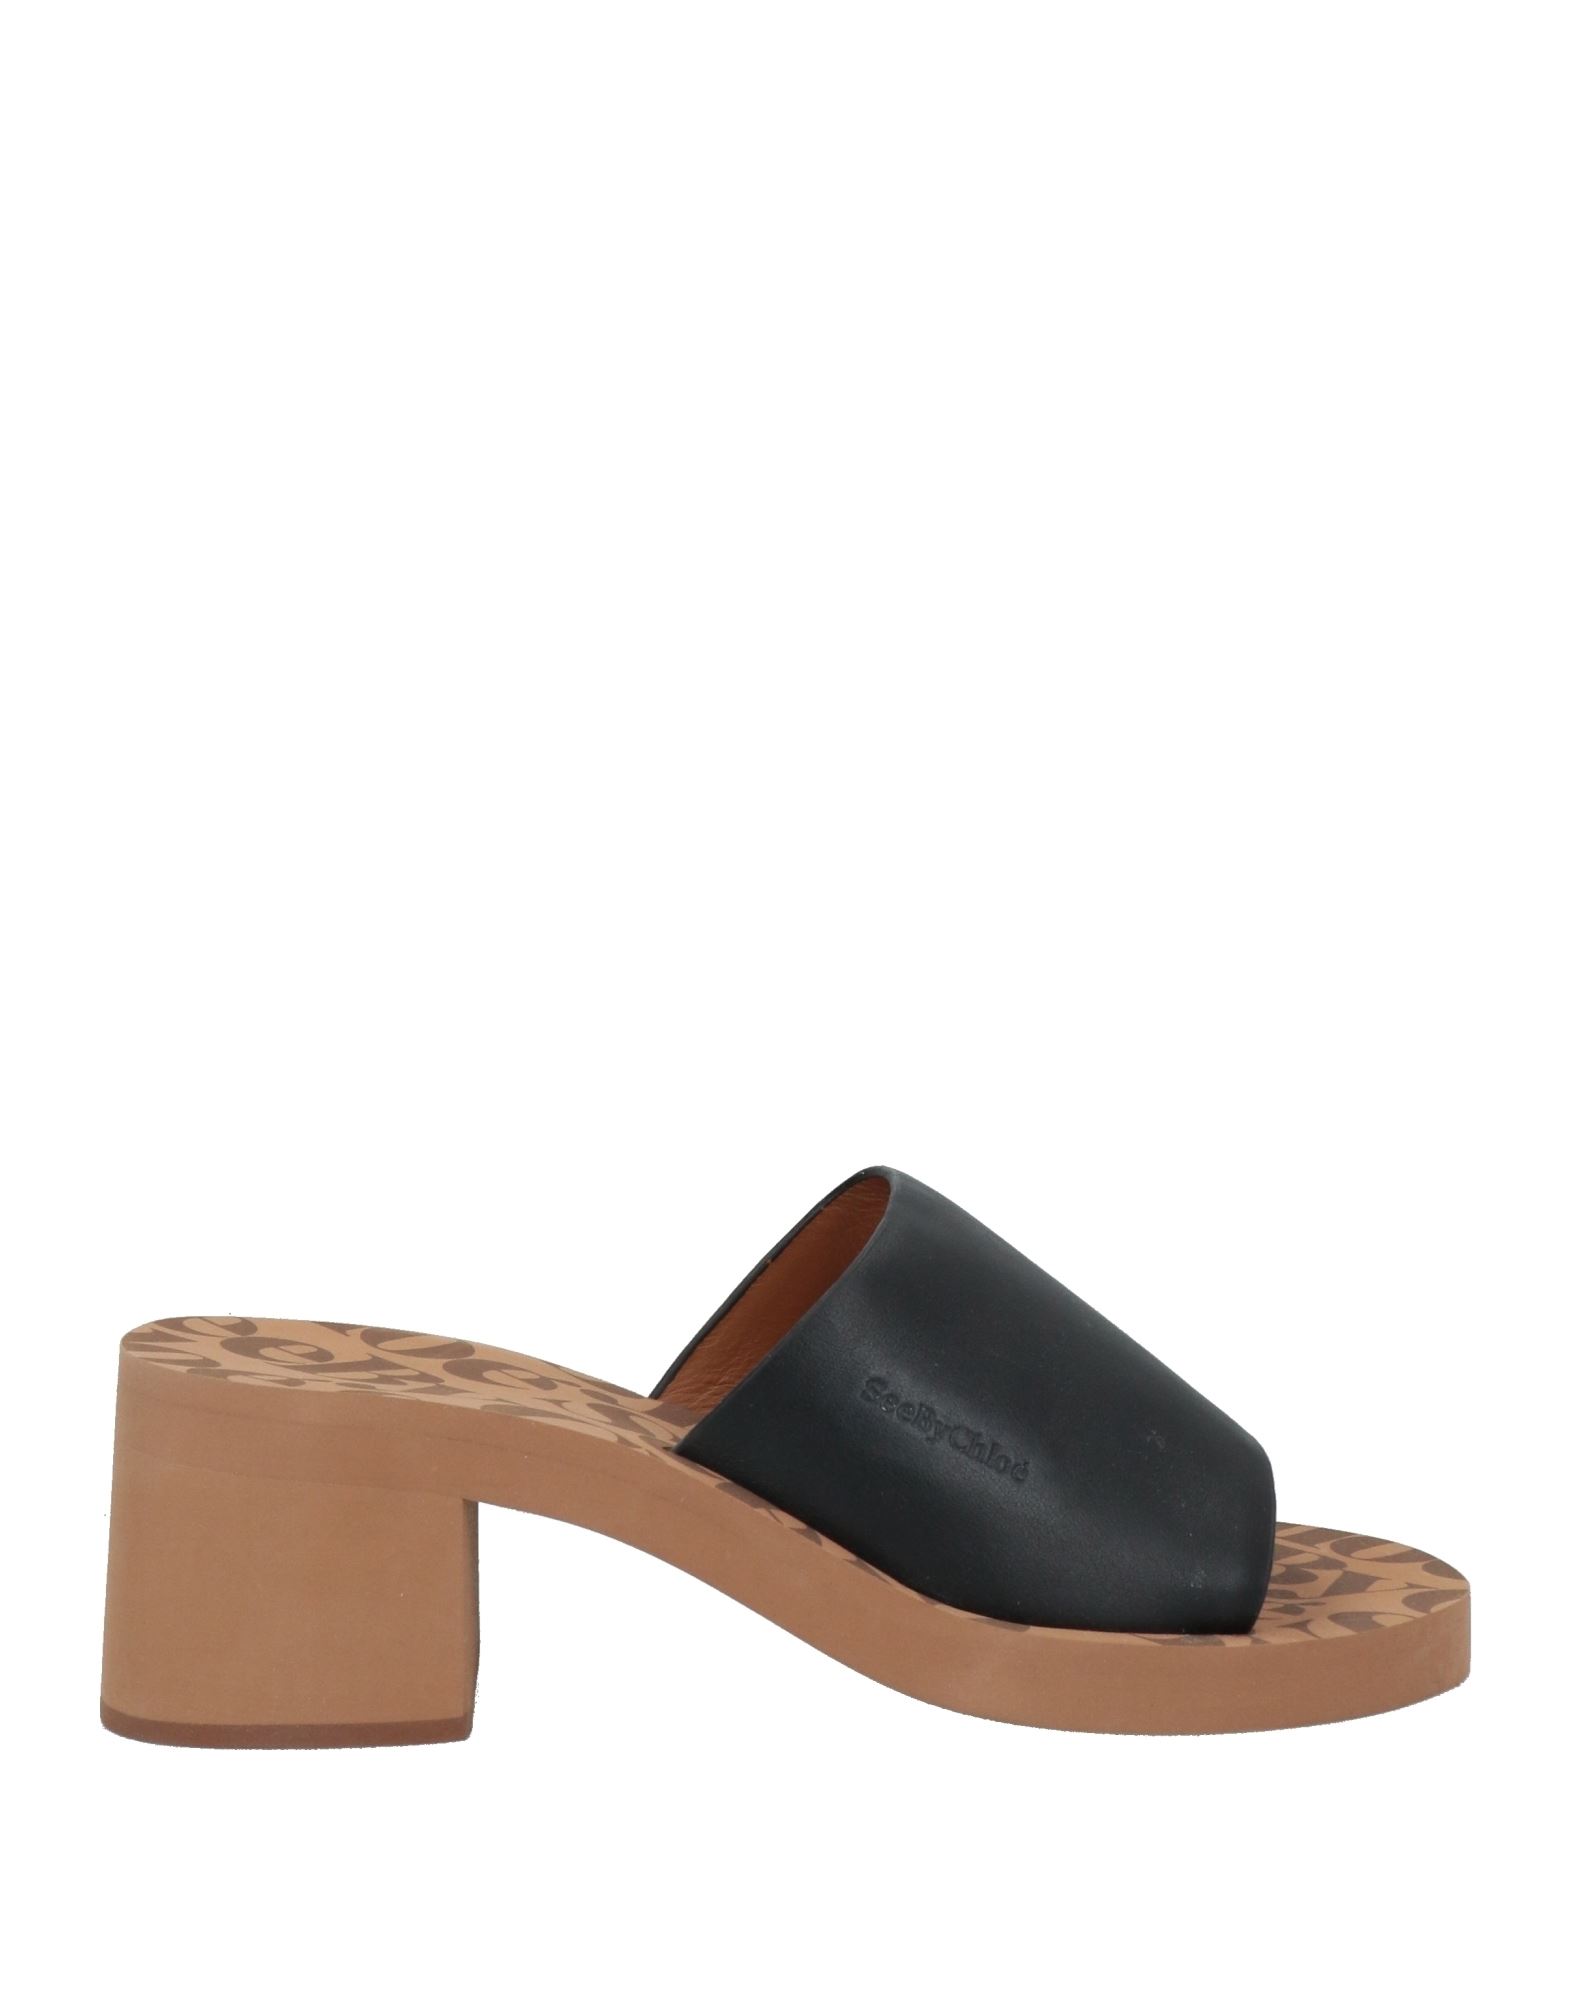 See By Chloé Sandals In Black